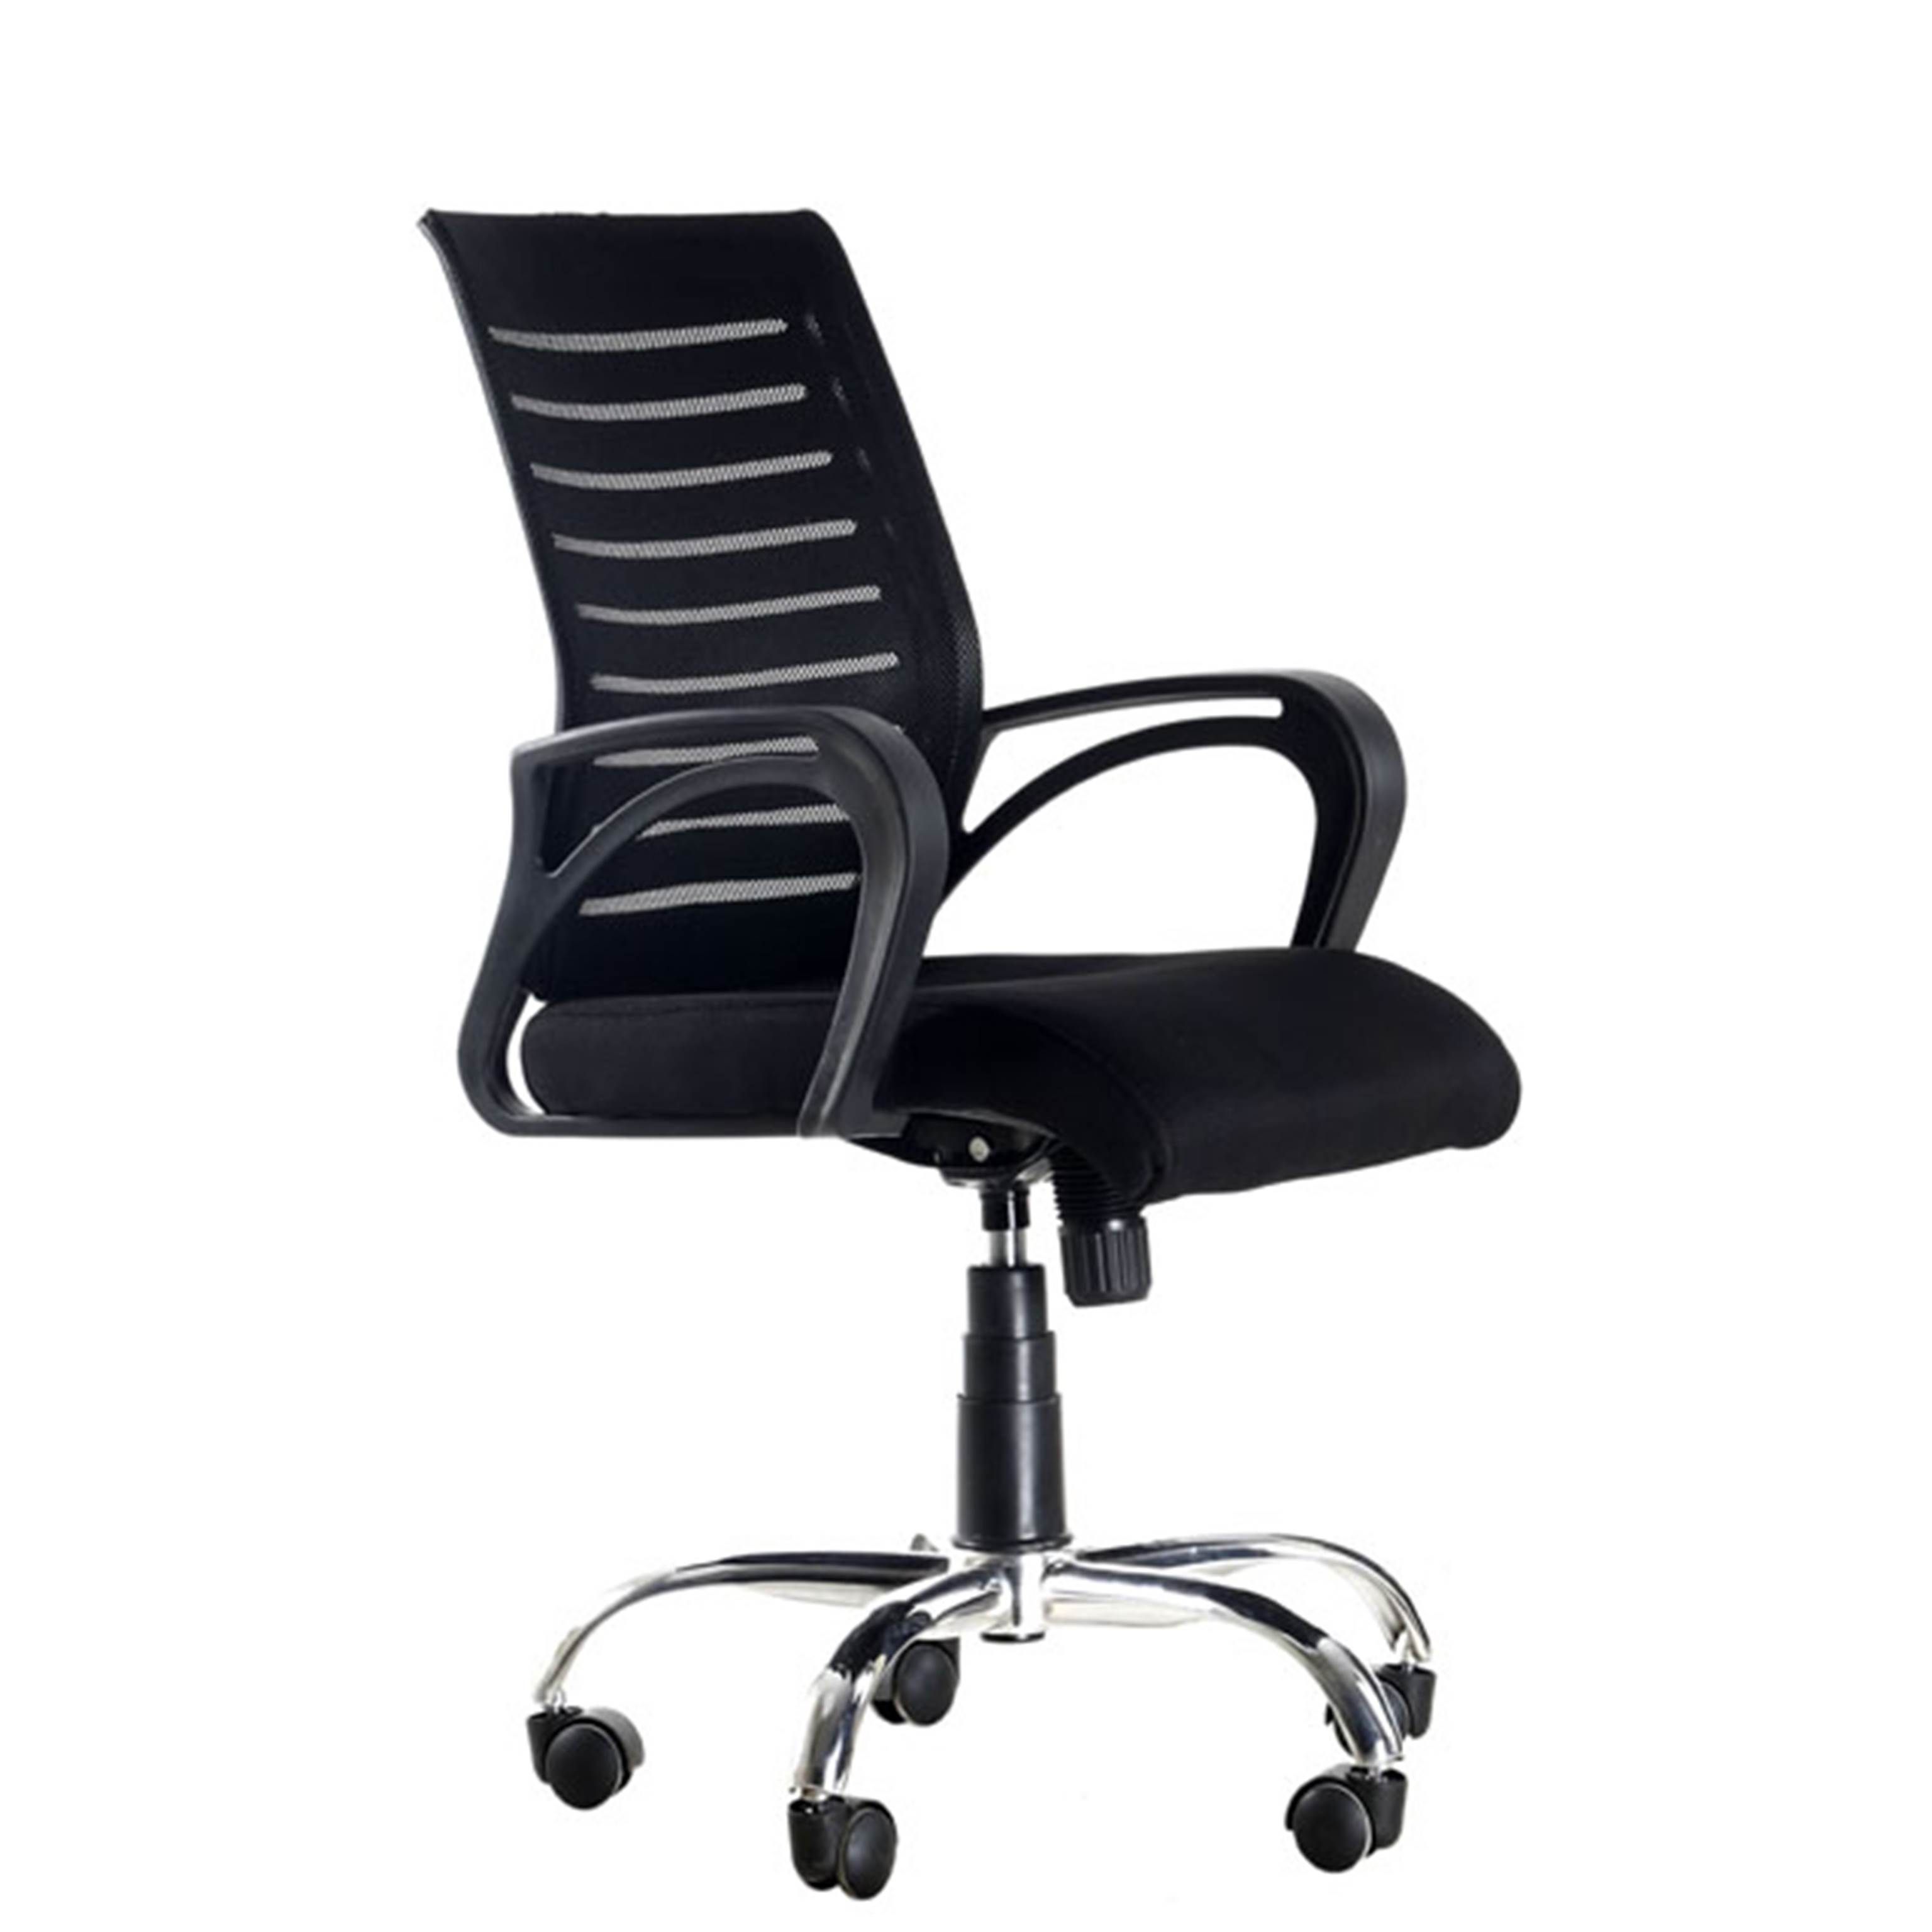 Regent Boom High Back Office Chair Buy Regent Boom High Back Office Chair Online At Best Prices In India On Snapdeal